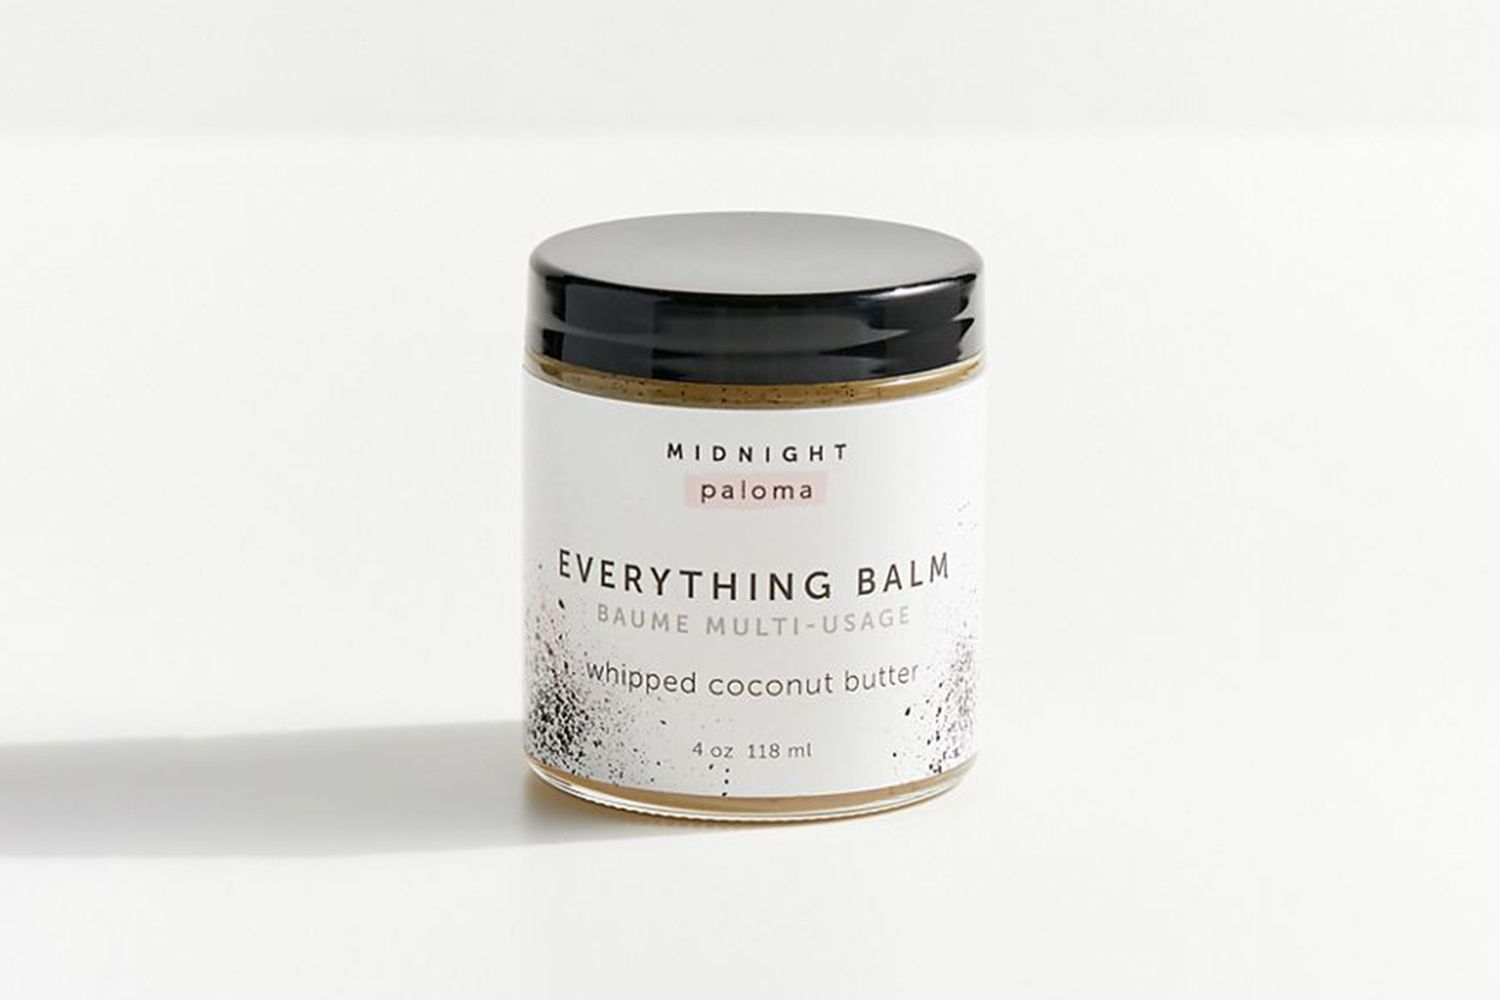 The Everything Balm